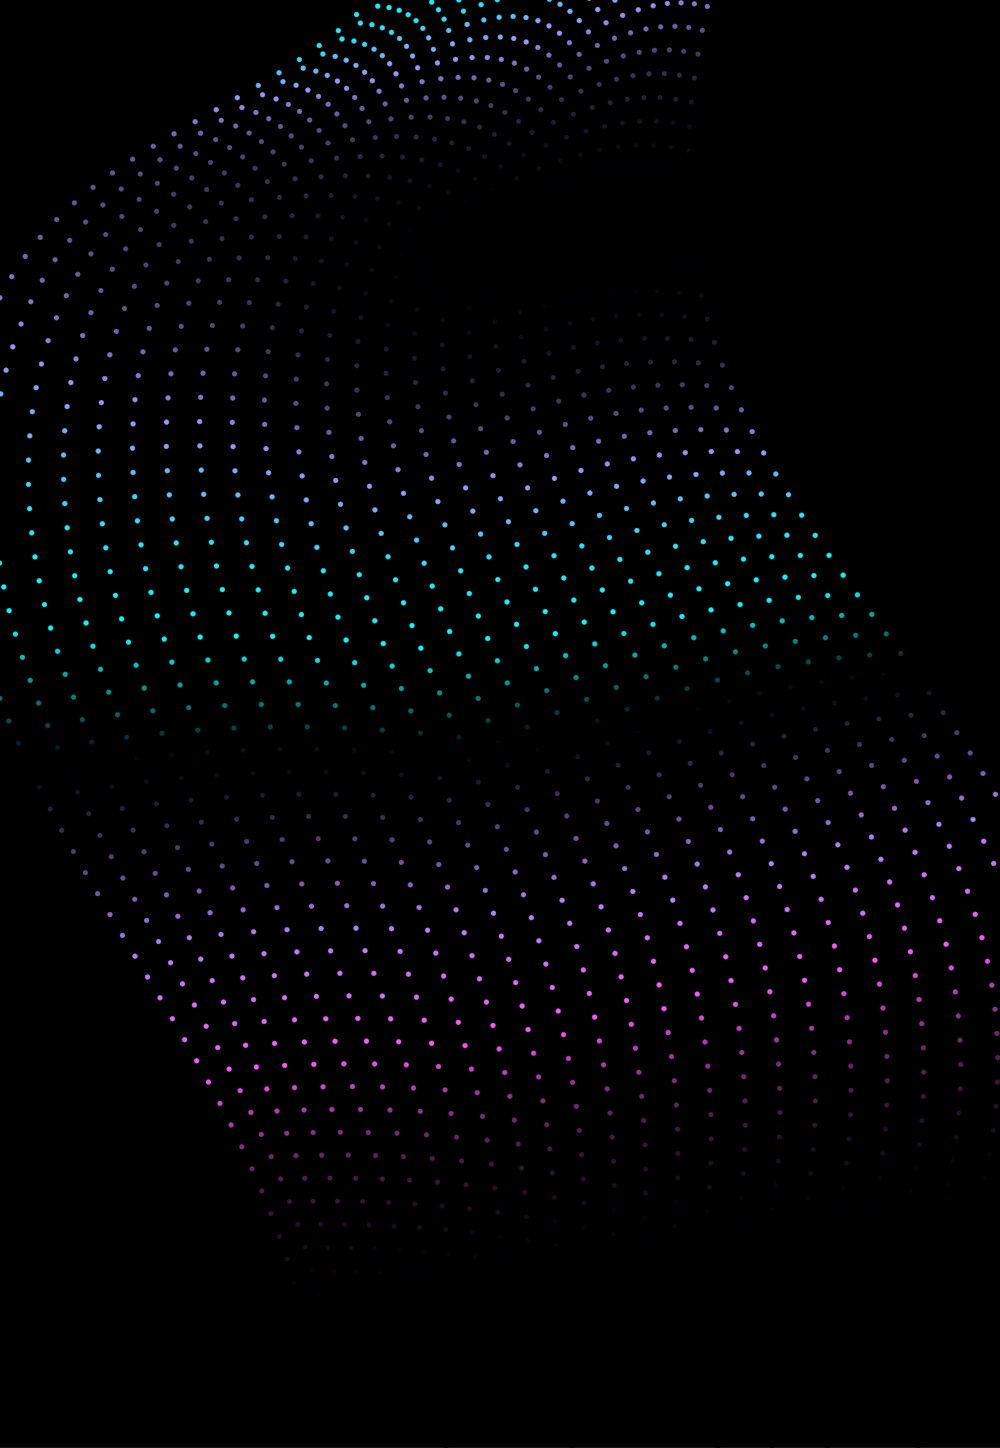 a black background with a pattern of dots